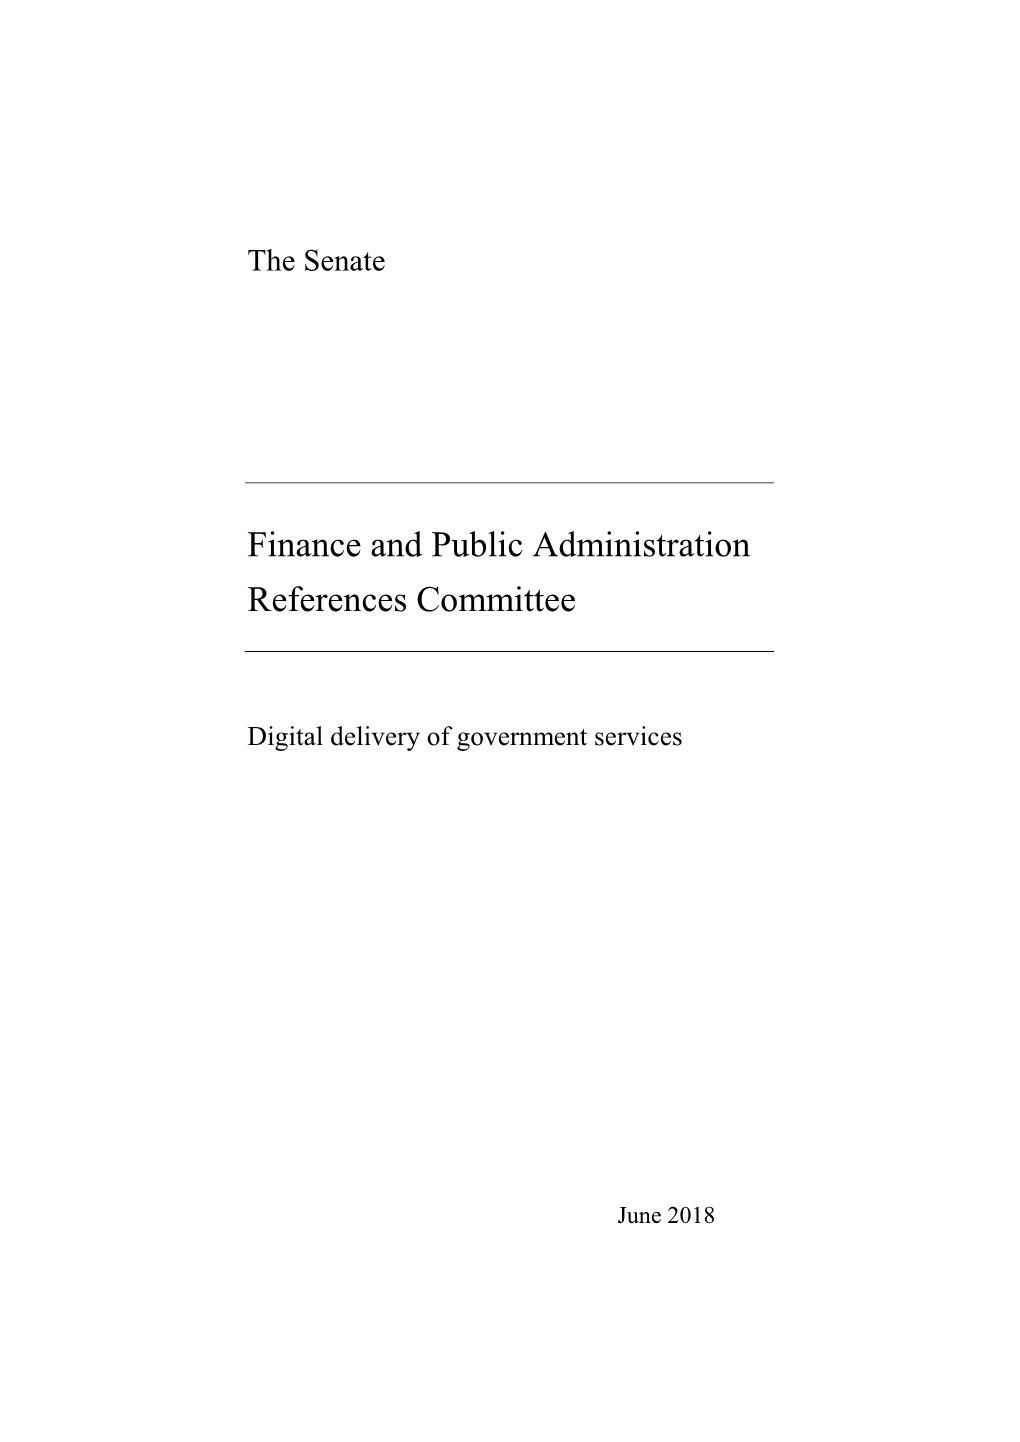 Finance and Public Administration References Committee